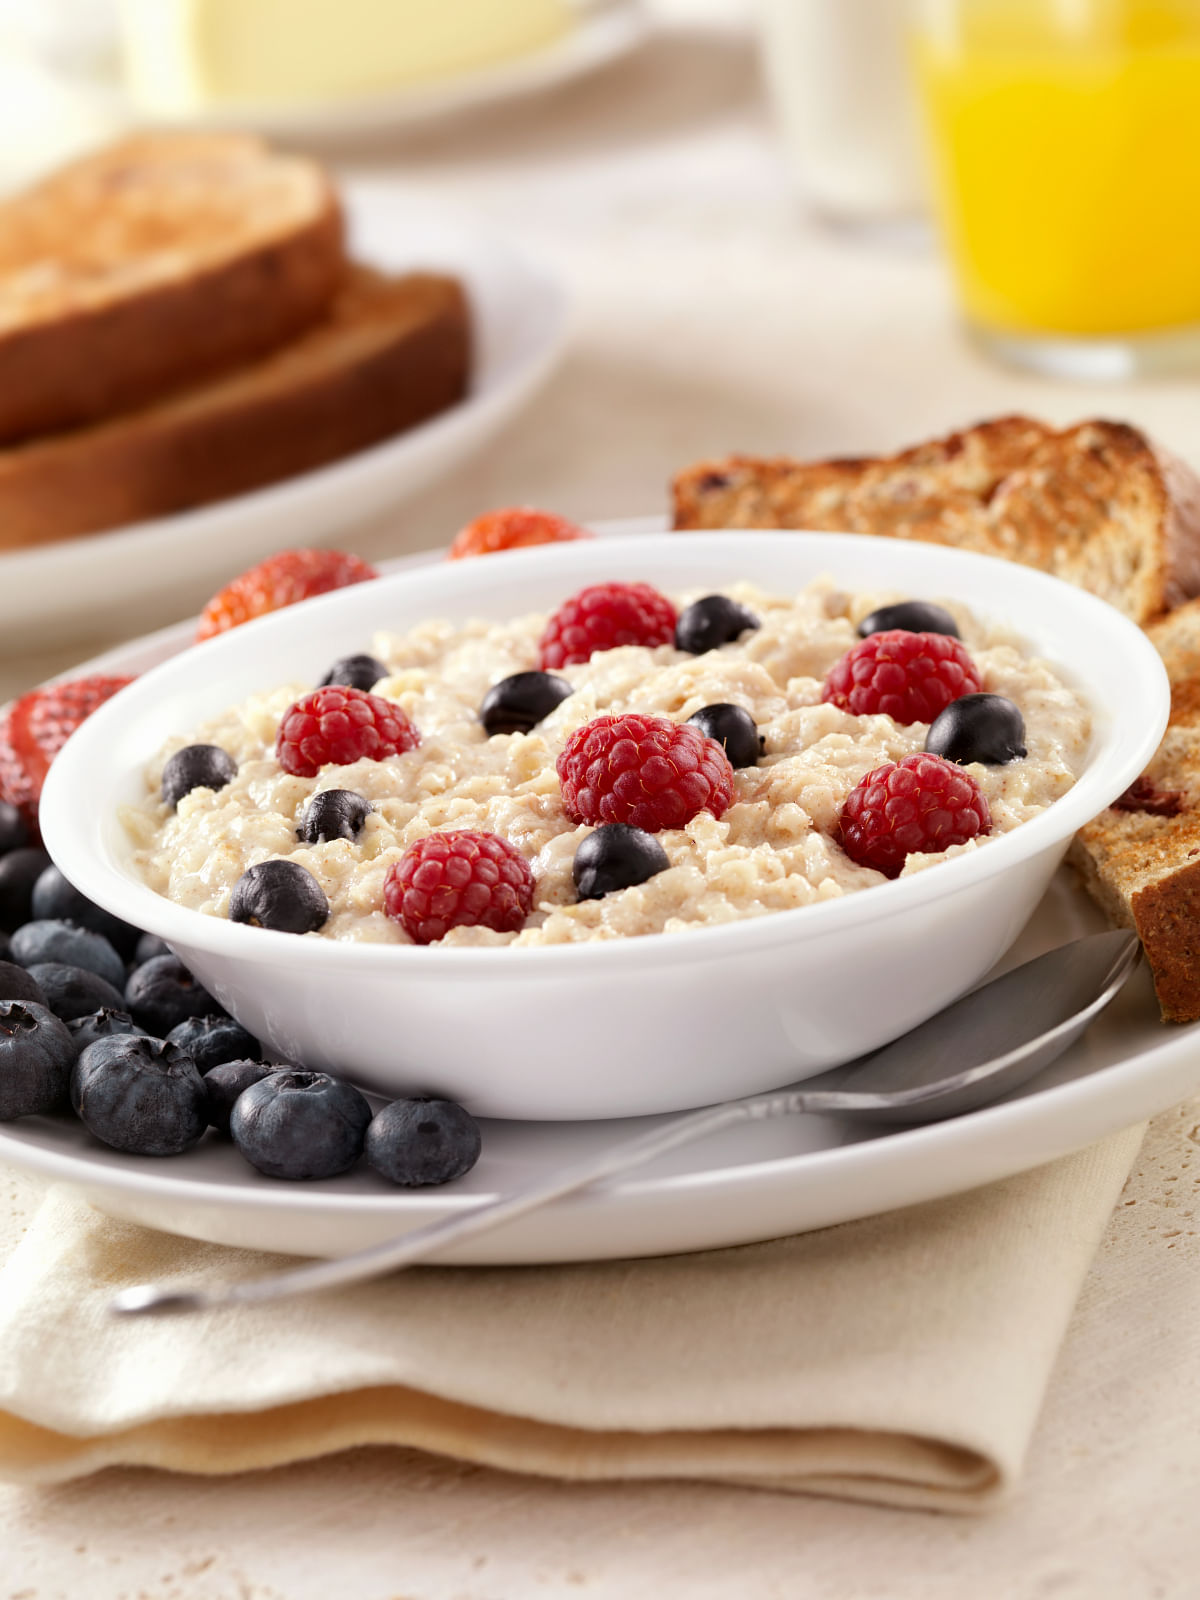 For those who absolutely hate bread, here are some easy bread-less breakfast options!